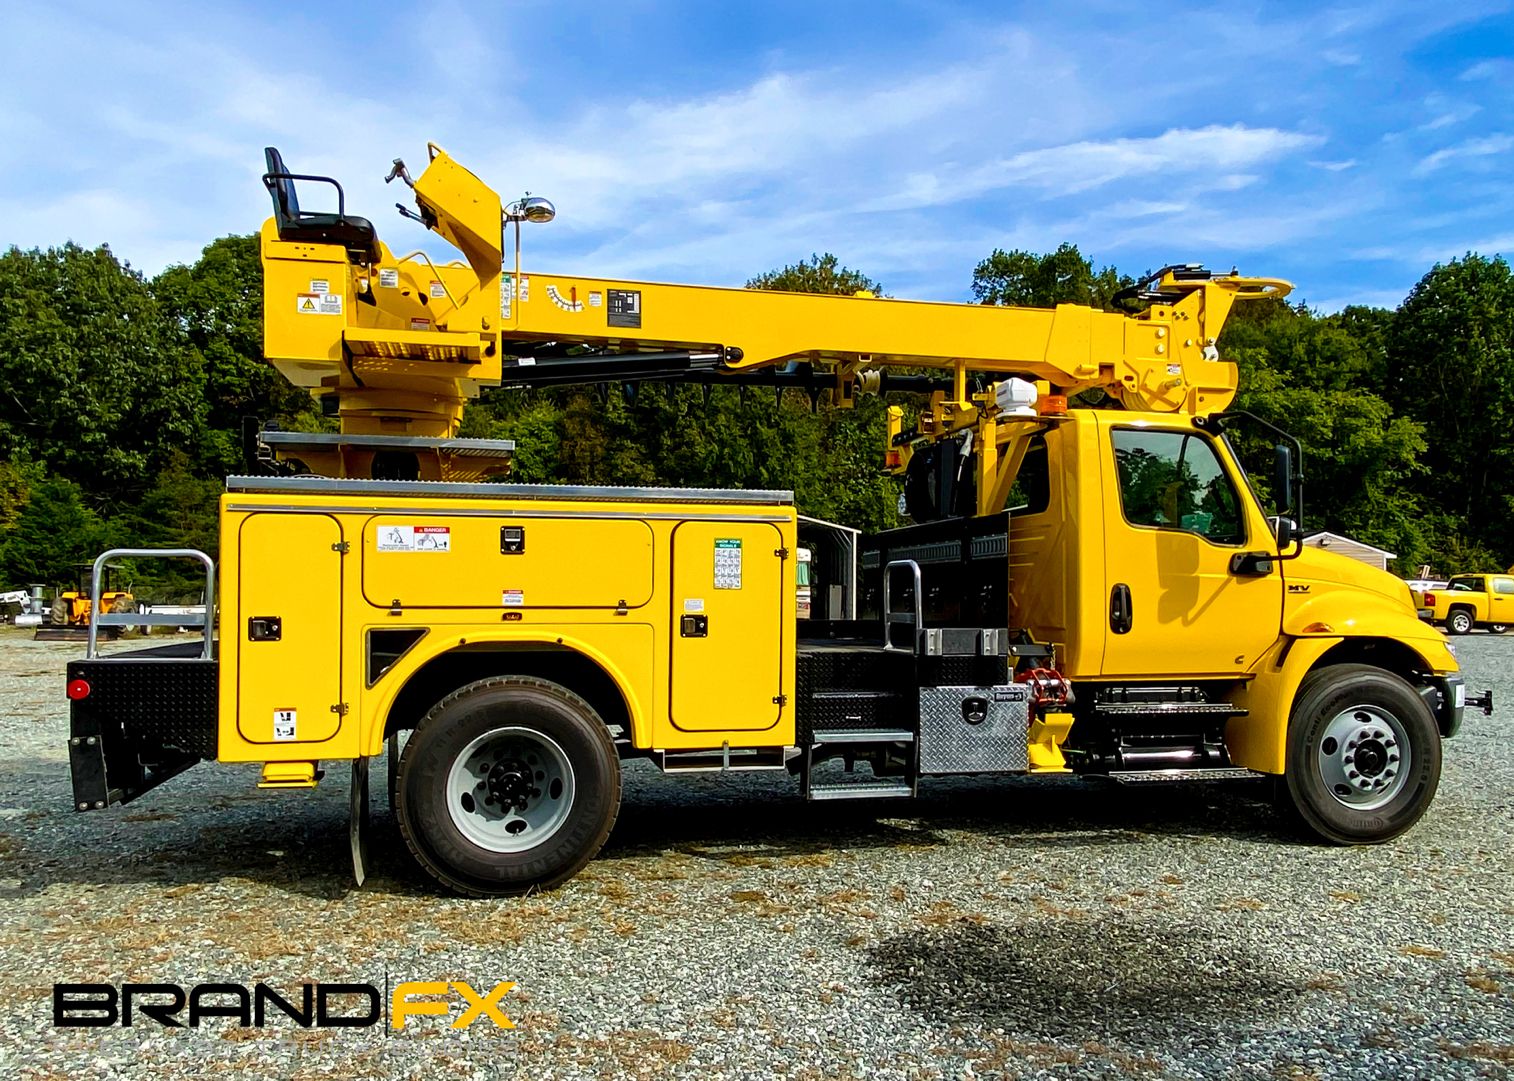 Lightweight Truck Body and Aerial Lift Advantages